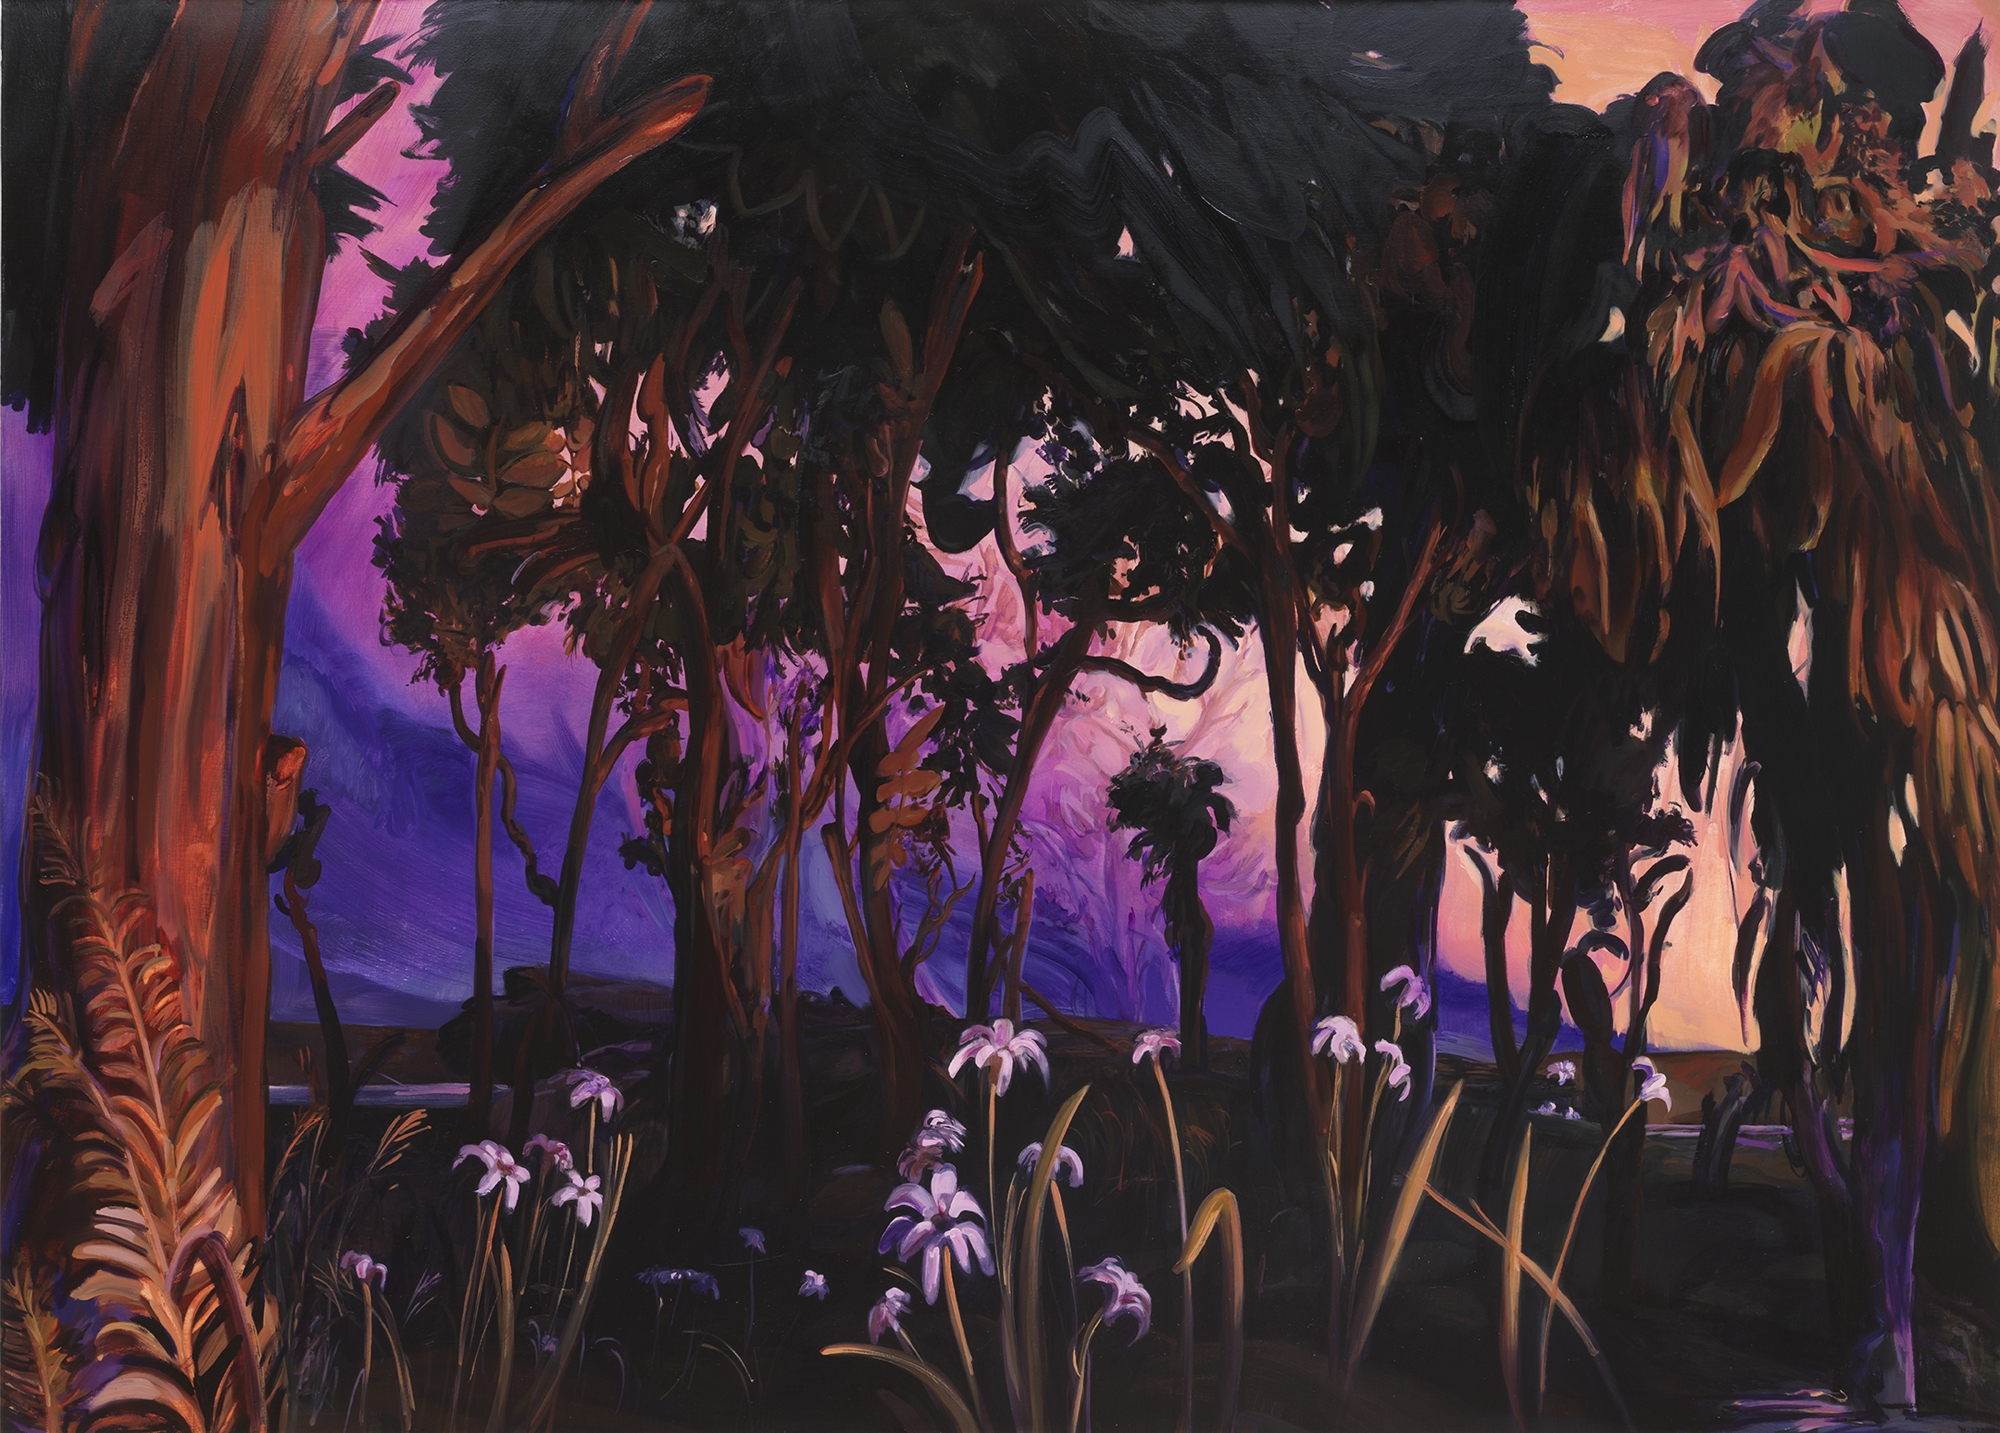 Emma Webster, Dusk Till Dawn, 2021. Oil on linen. 60 x 84 inches Unframed: 60 1/4 x 84 1/4 x 2 inches. © the artist, image courtesy of the artist and Alexander Berggruen, New York